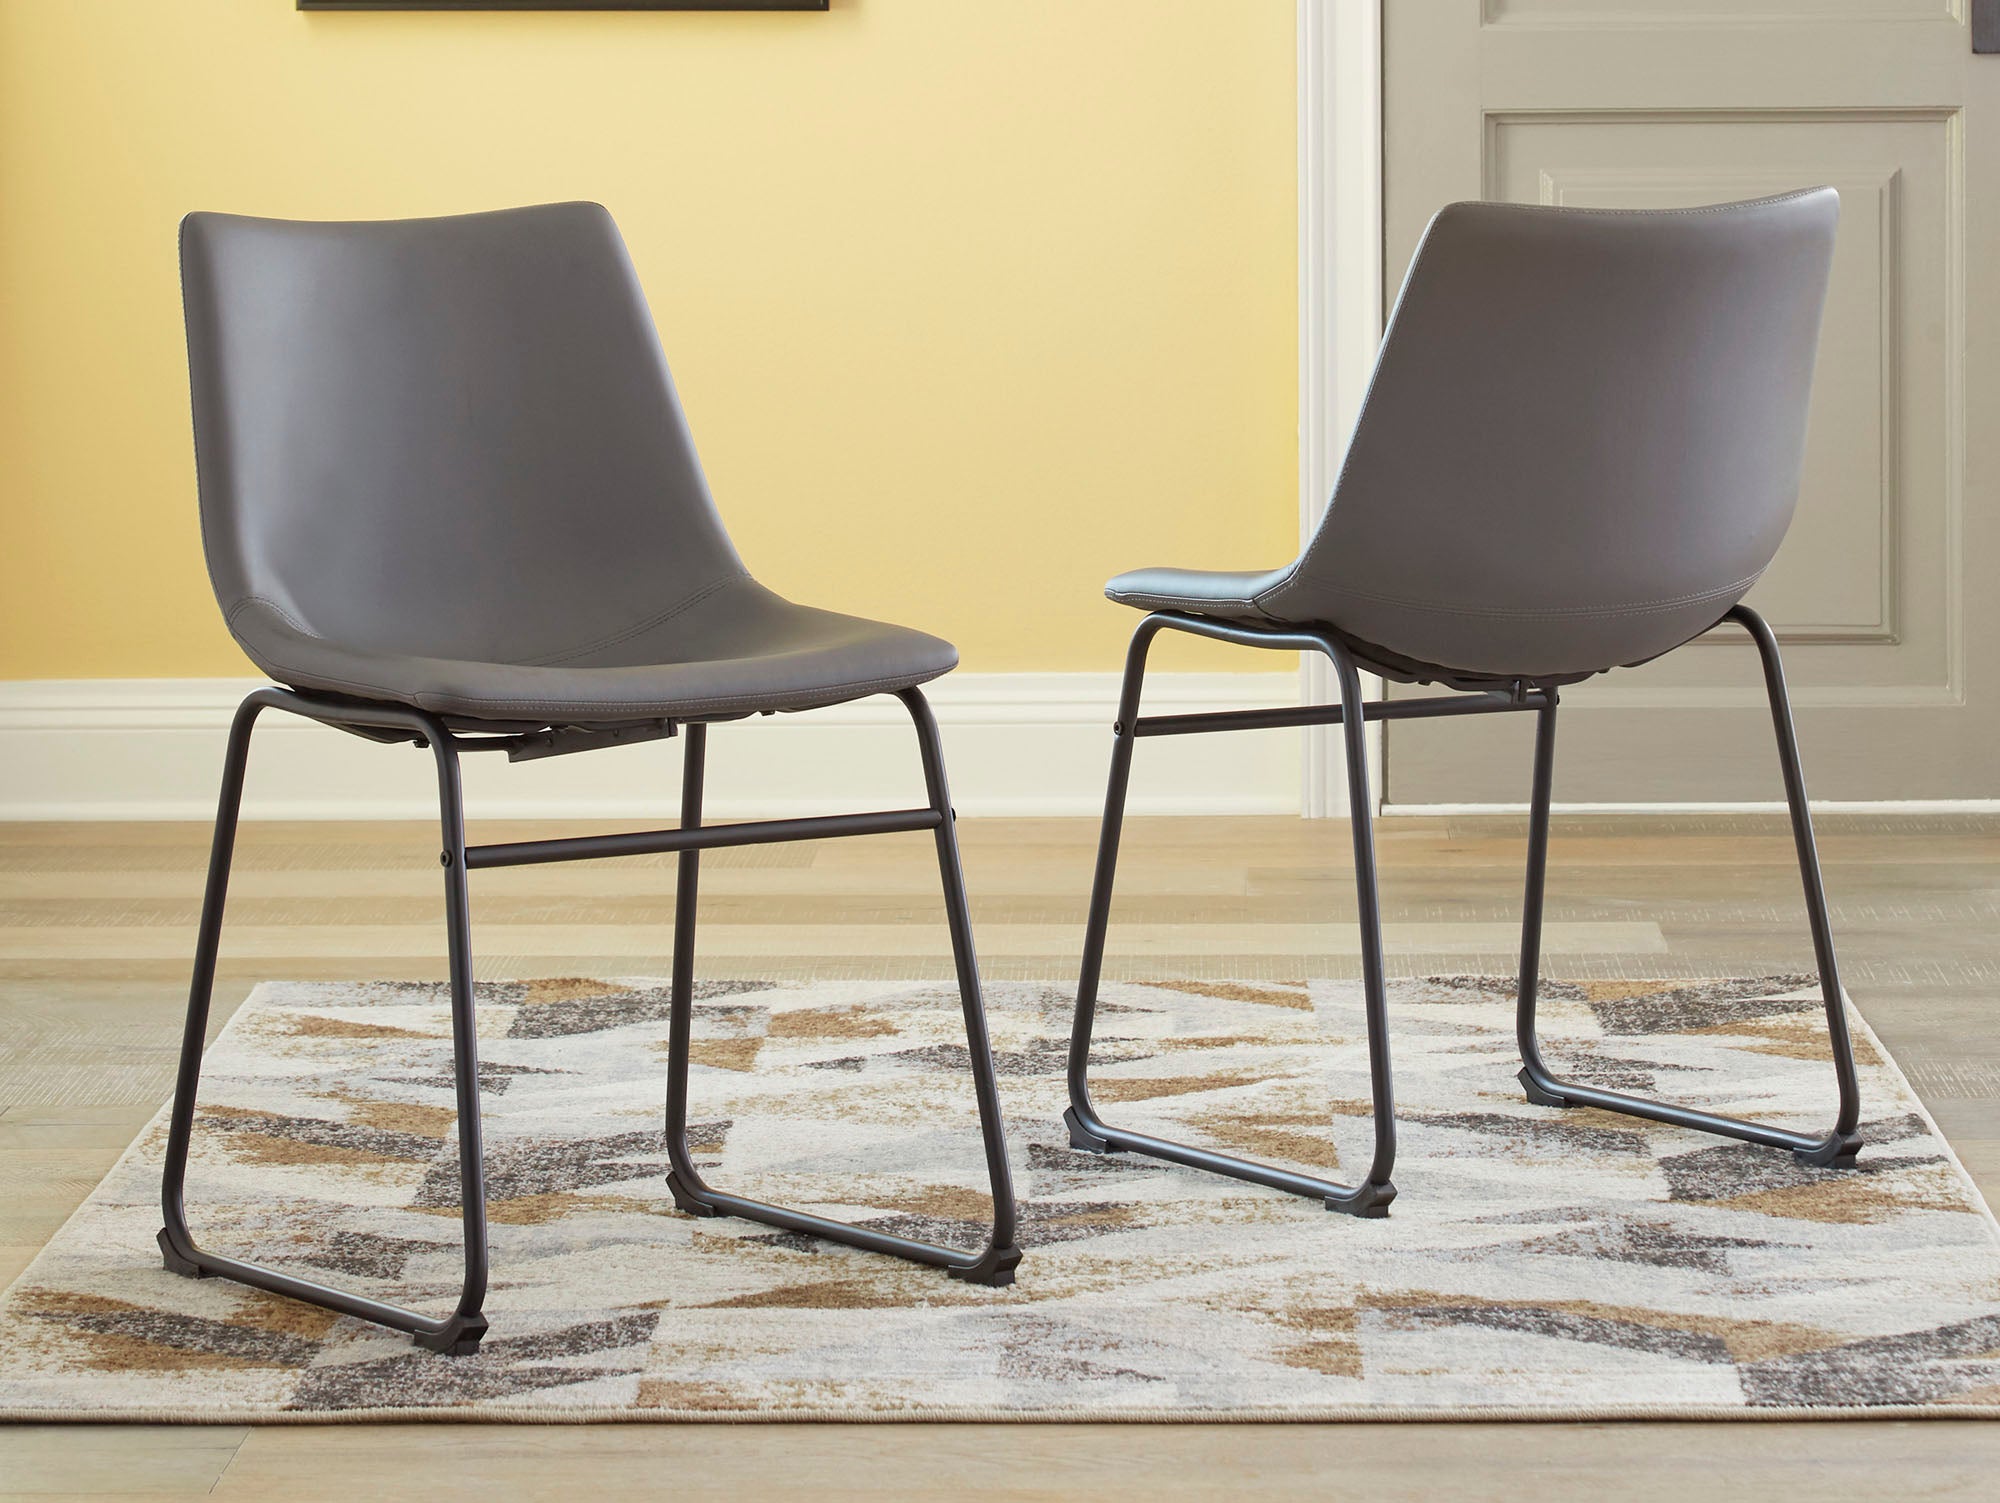 Centiar Gray Dining Chair - MJM Furniture